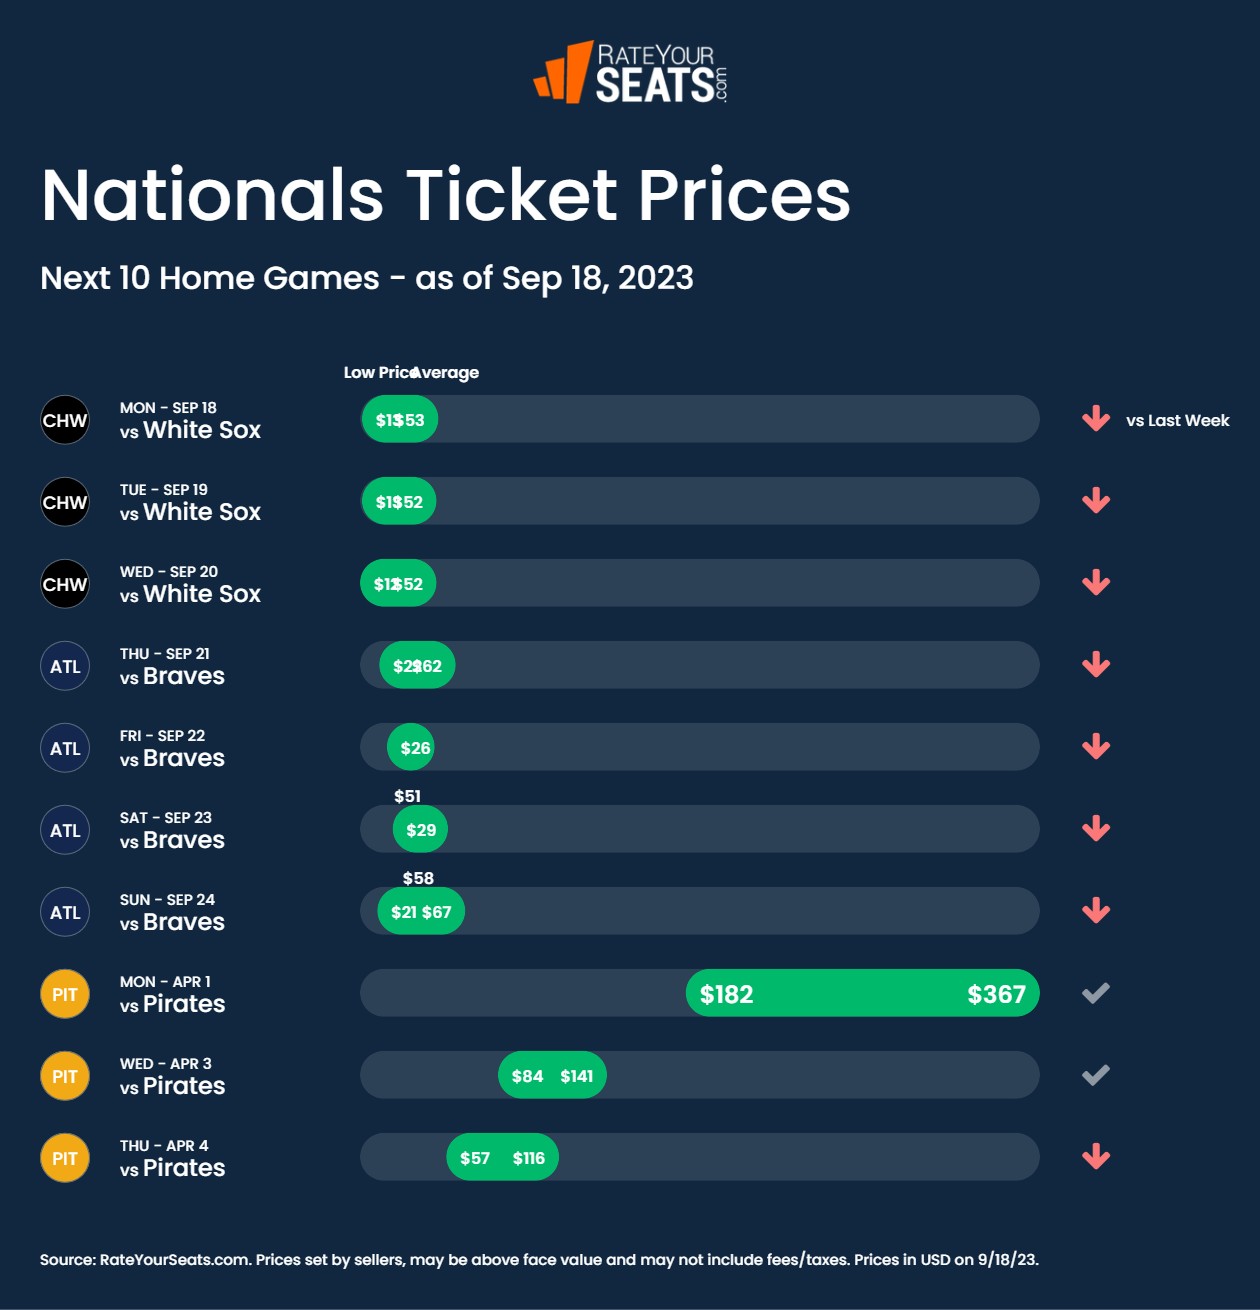 Nationals tickets pricing week of September 18 2023